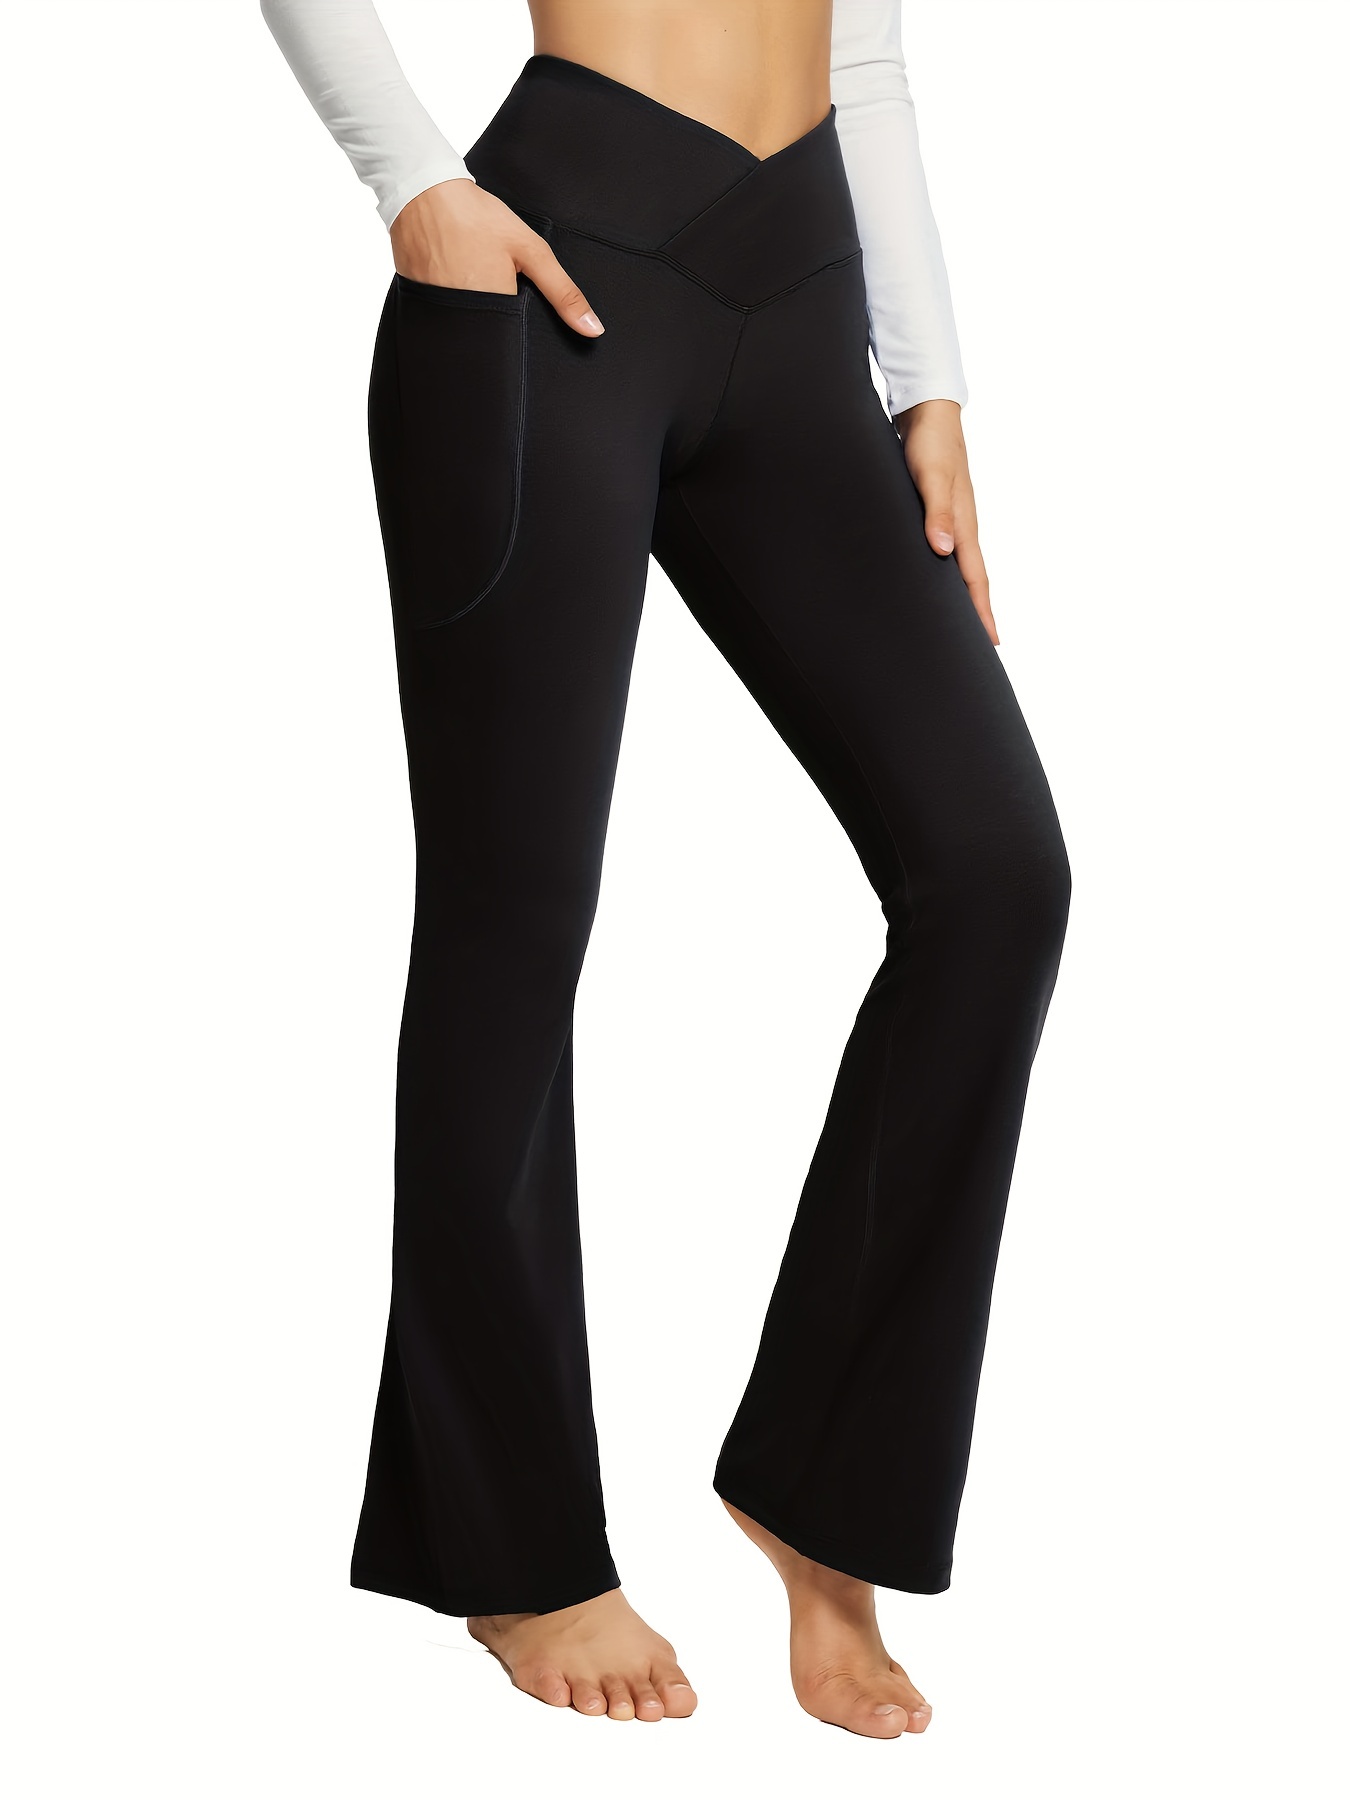 Women's Black Flare Yoga Pants, Crossover High Waisted Casual